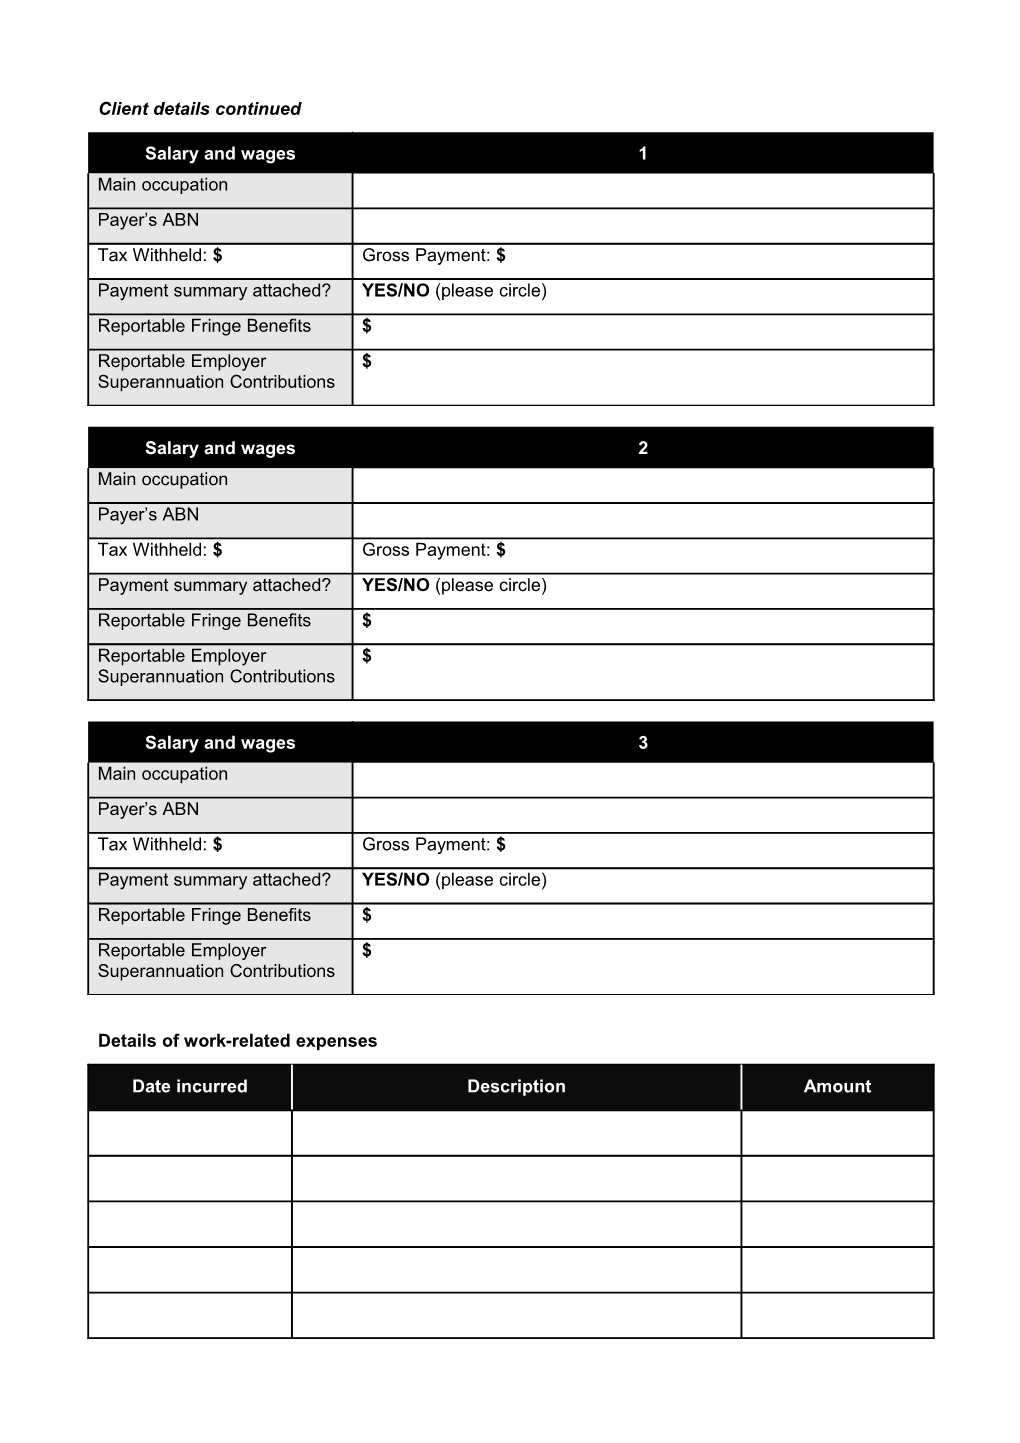 Client Details Form Individual Income Tax Return